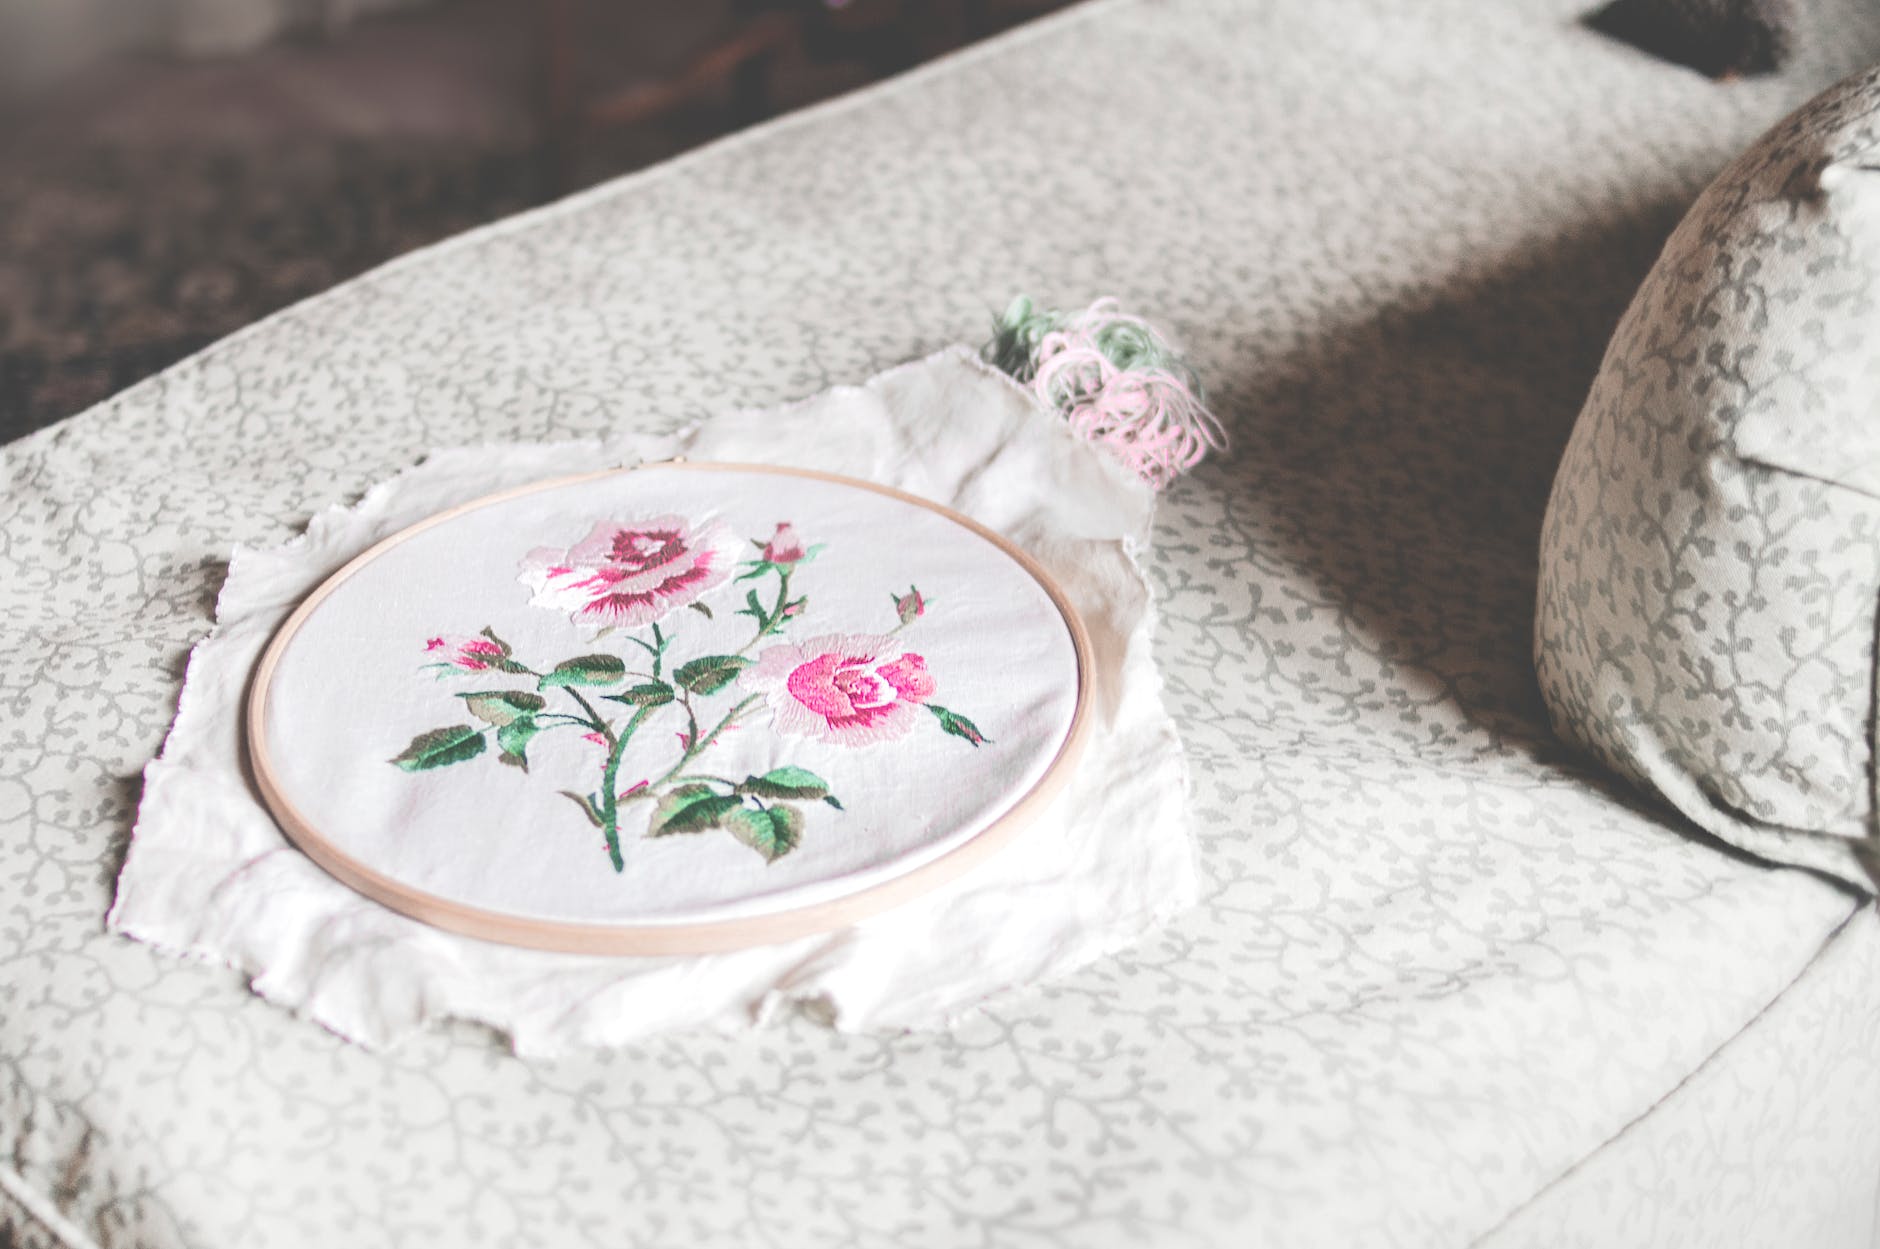 Embroidery 101: A Beginner’s Guide to Getting Started